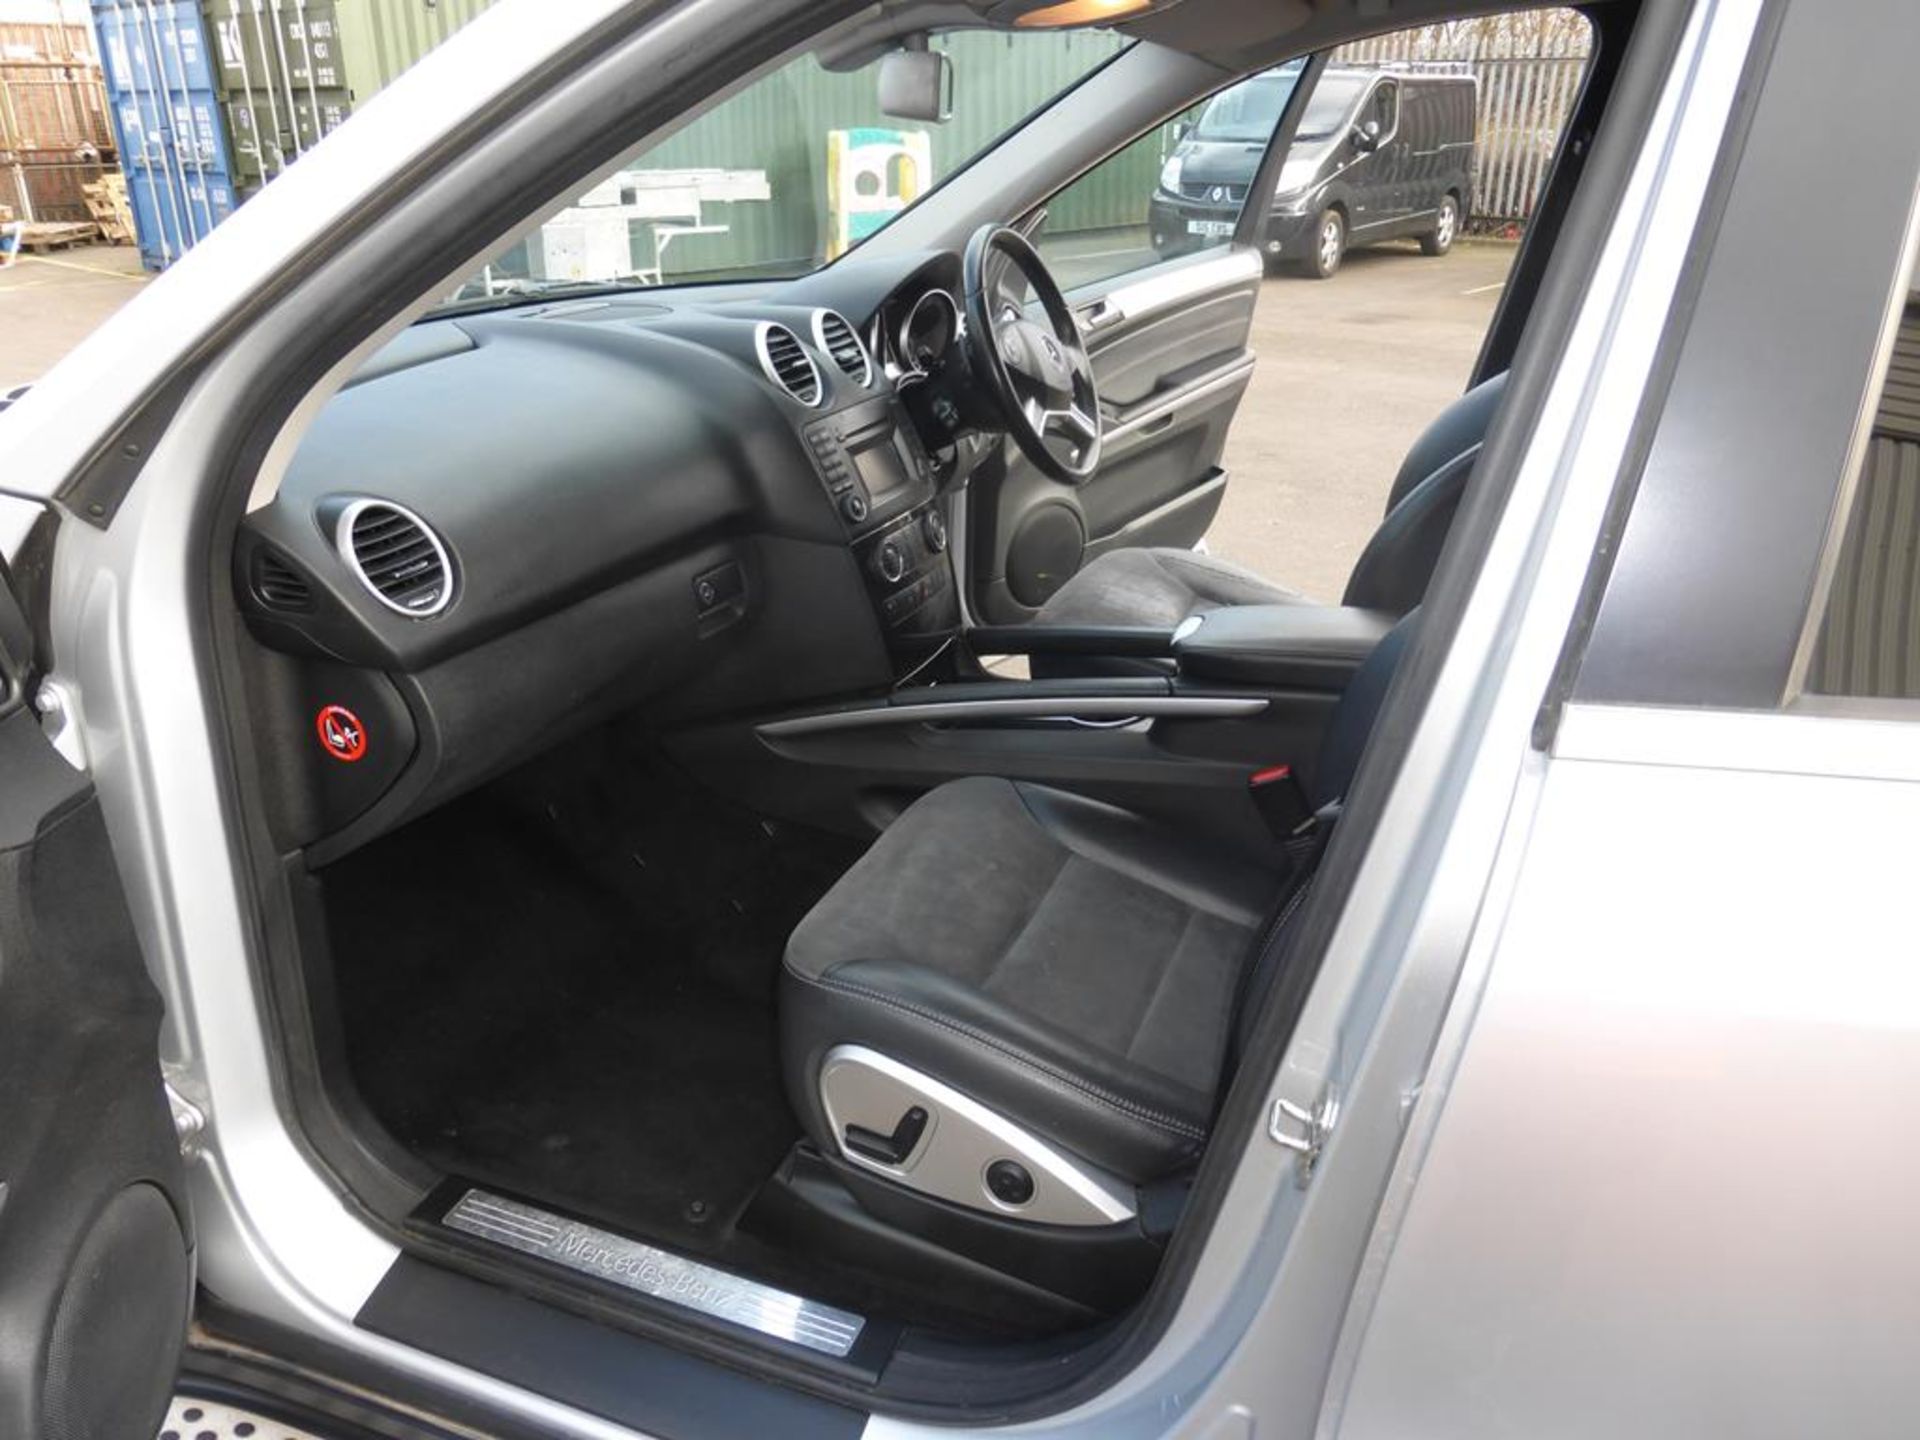 A Mercedes Benz ML 4x4 Half Leather Interior Automatic/Bluetooth and Cruise Control. Date of First - Image 8 of 23